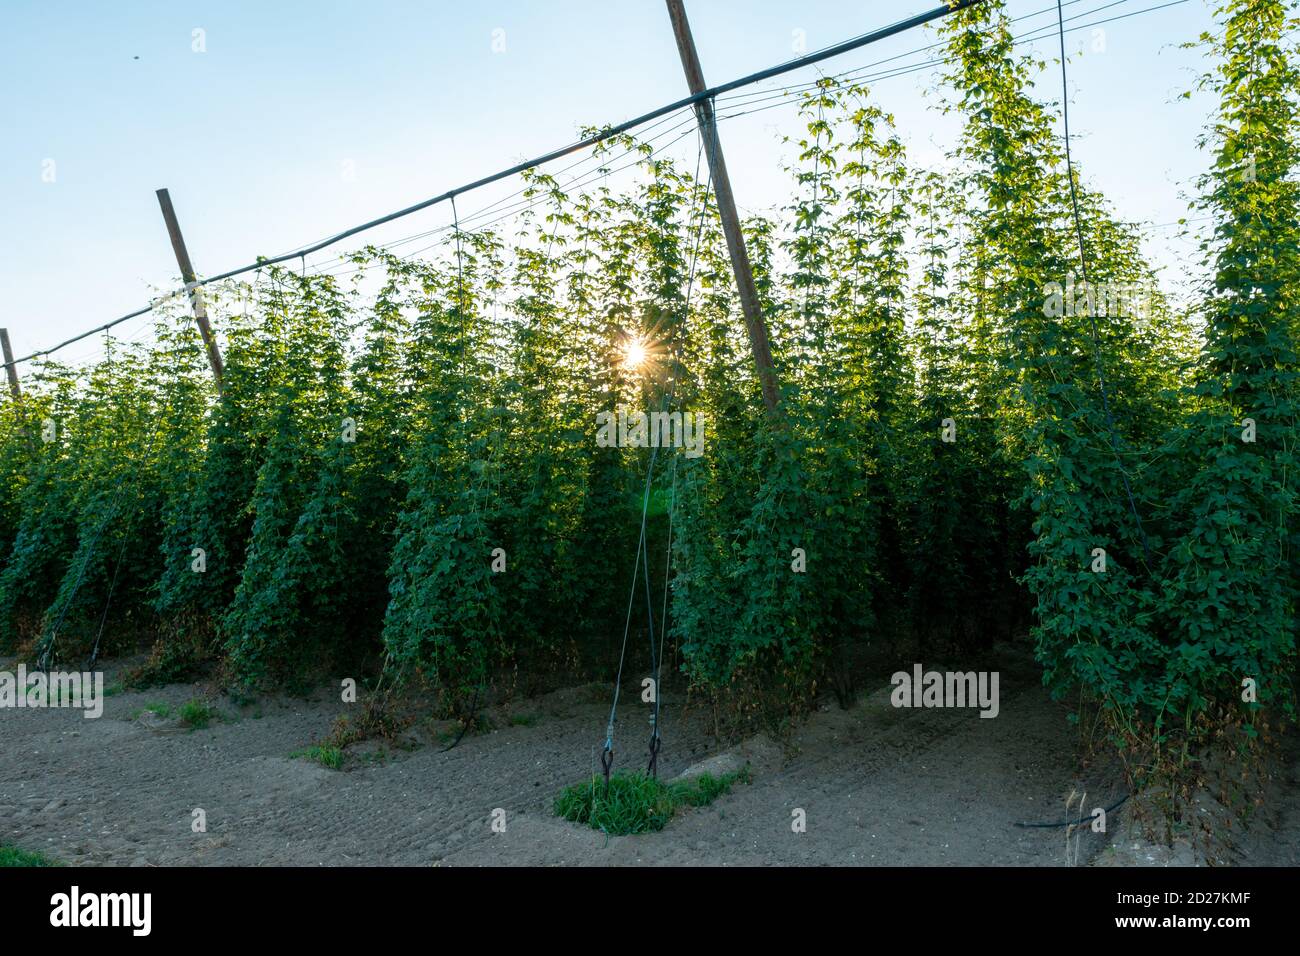 Green hops field. Fully grown hop bines. Hops field in Bavaria Germany. Hops are main ingredients in Beer production. Stock Photo